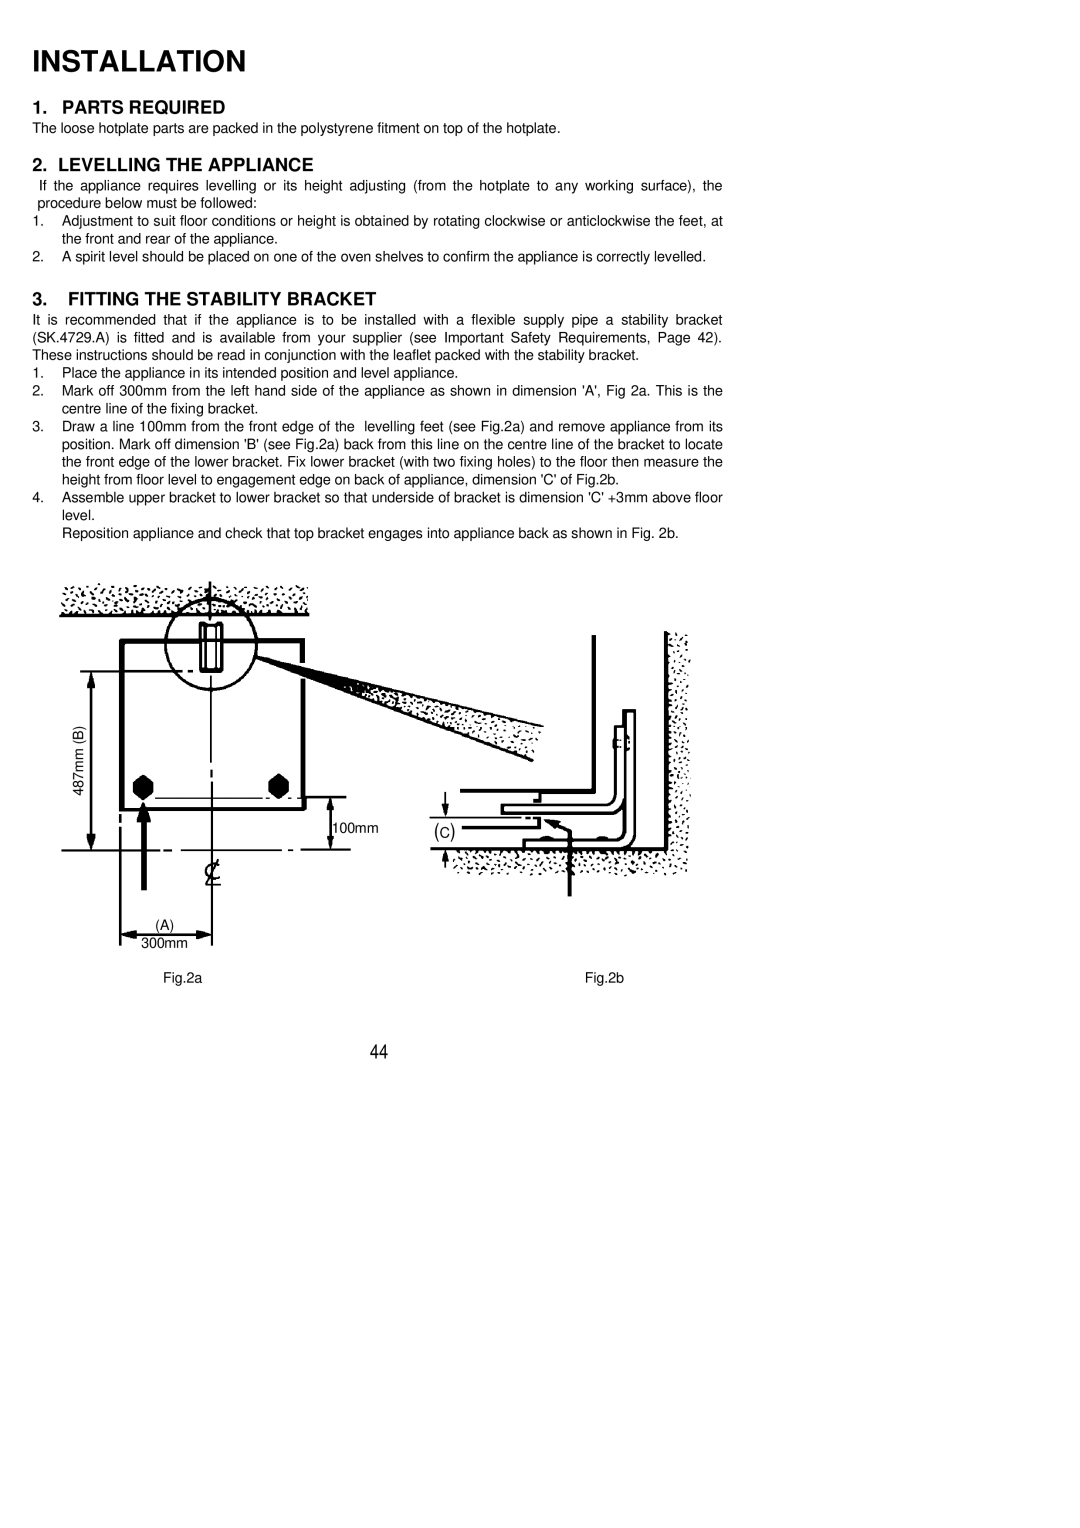 Electrolux SIG 553 installation instructions Parts Required, Levelling the Appliance, Fitting the Stability Bracket 